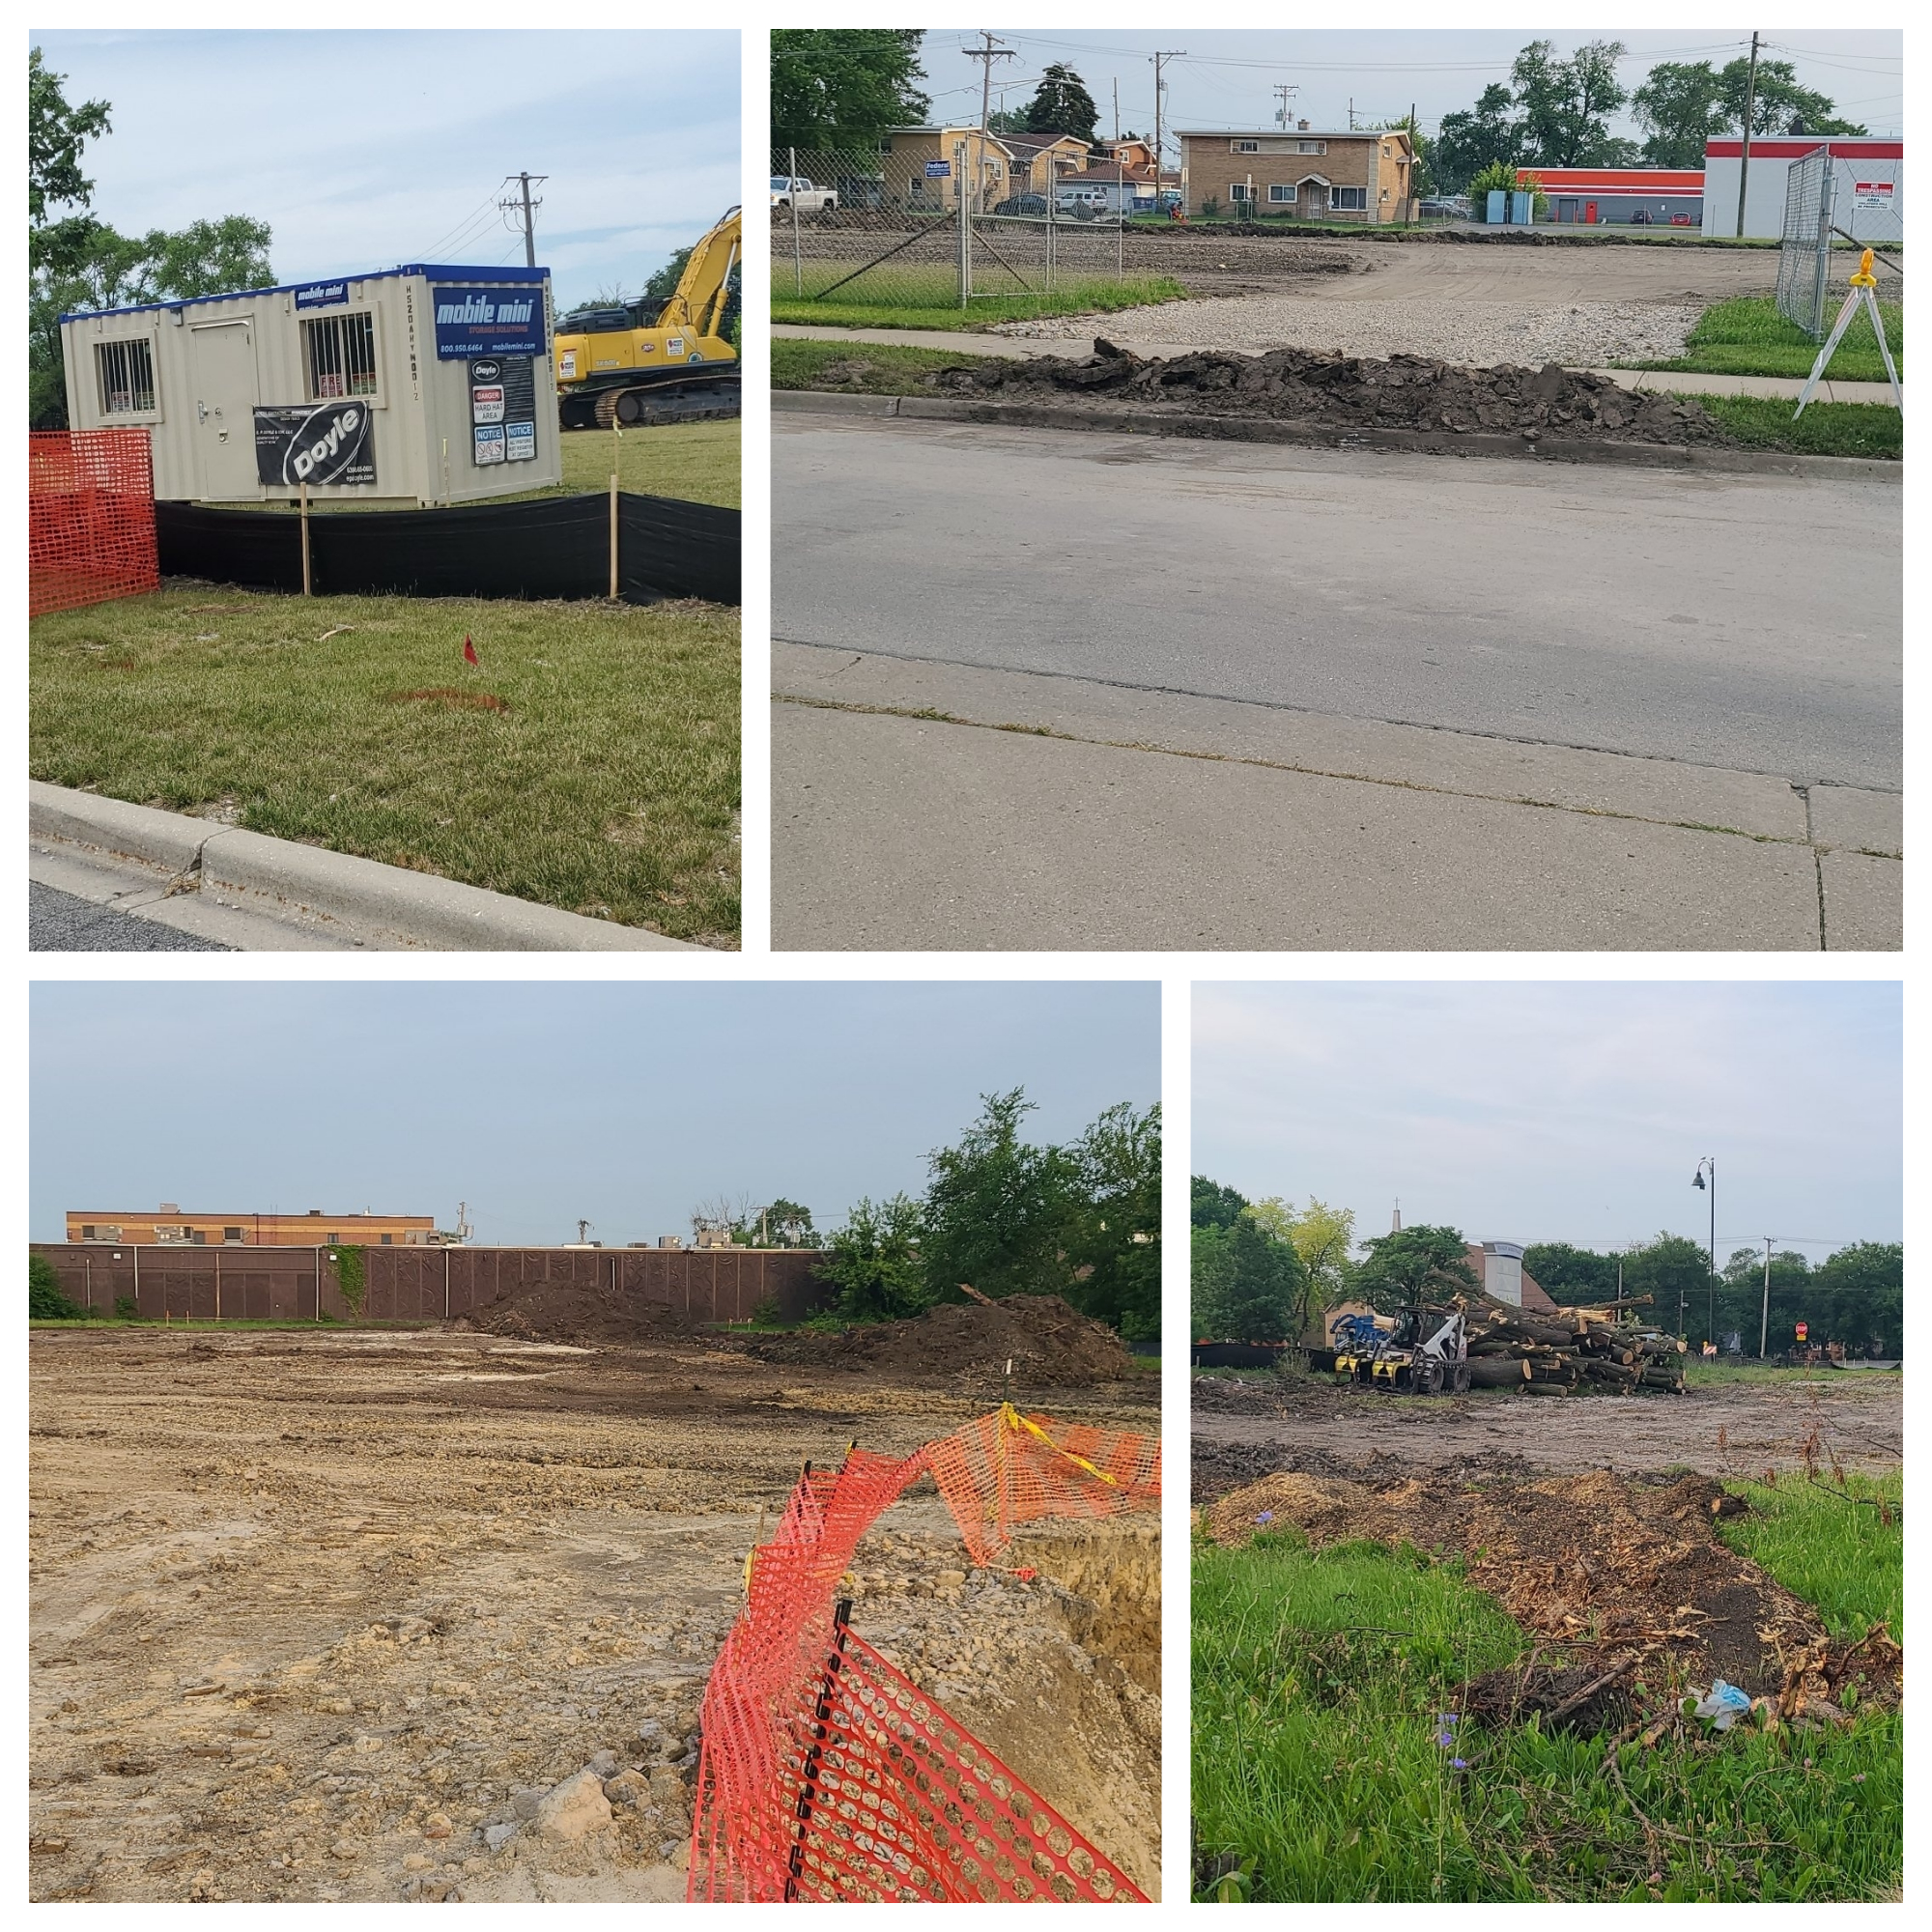 Photos from the Grand Avenue Project Site